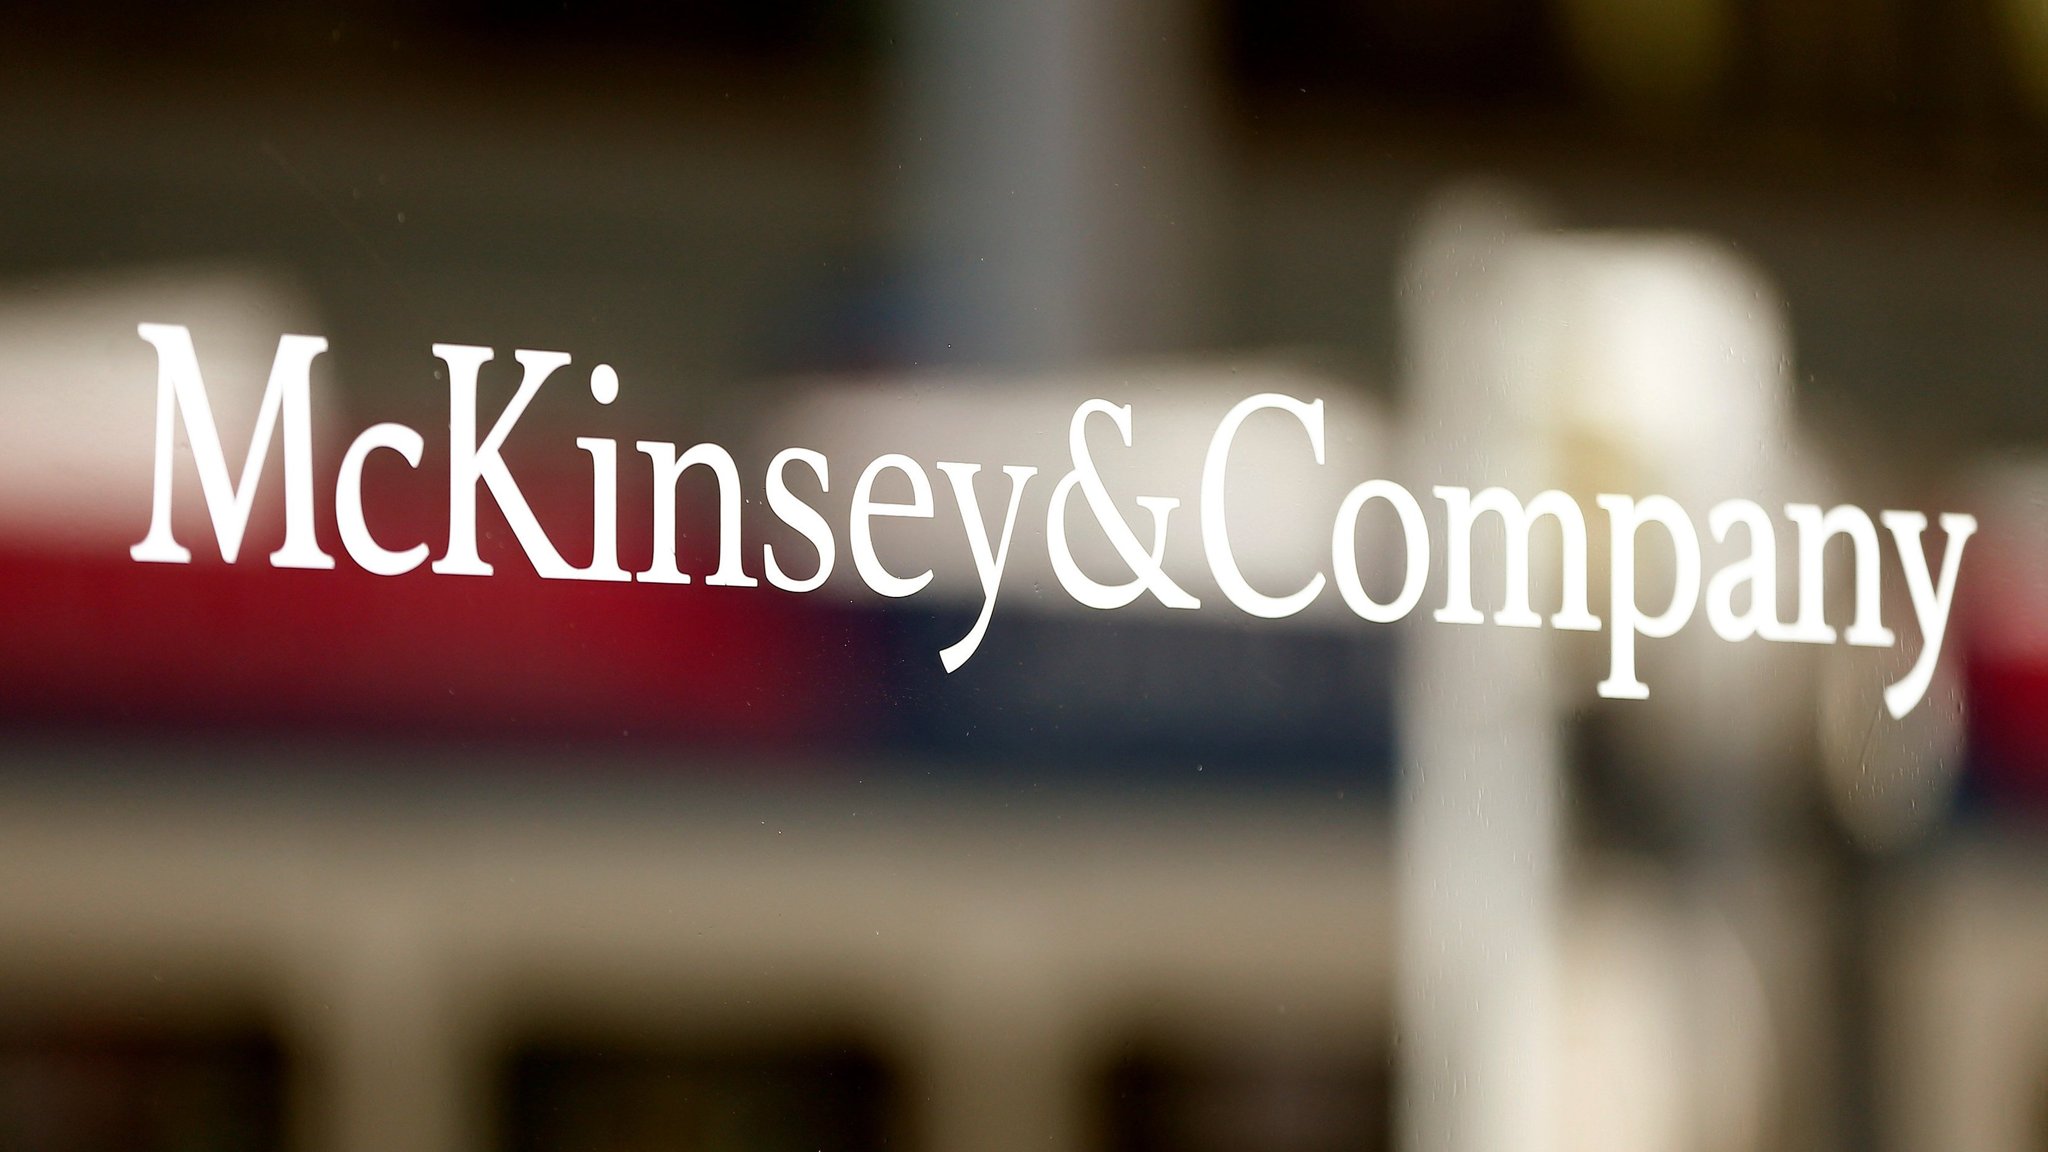 Barclays Africa And Standard Bank End Contracts With Mckinsey